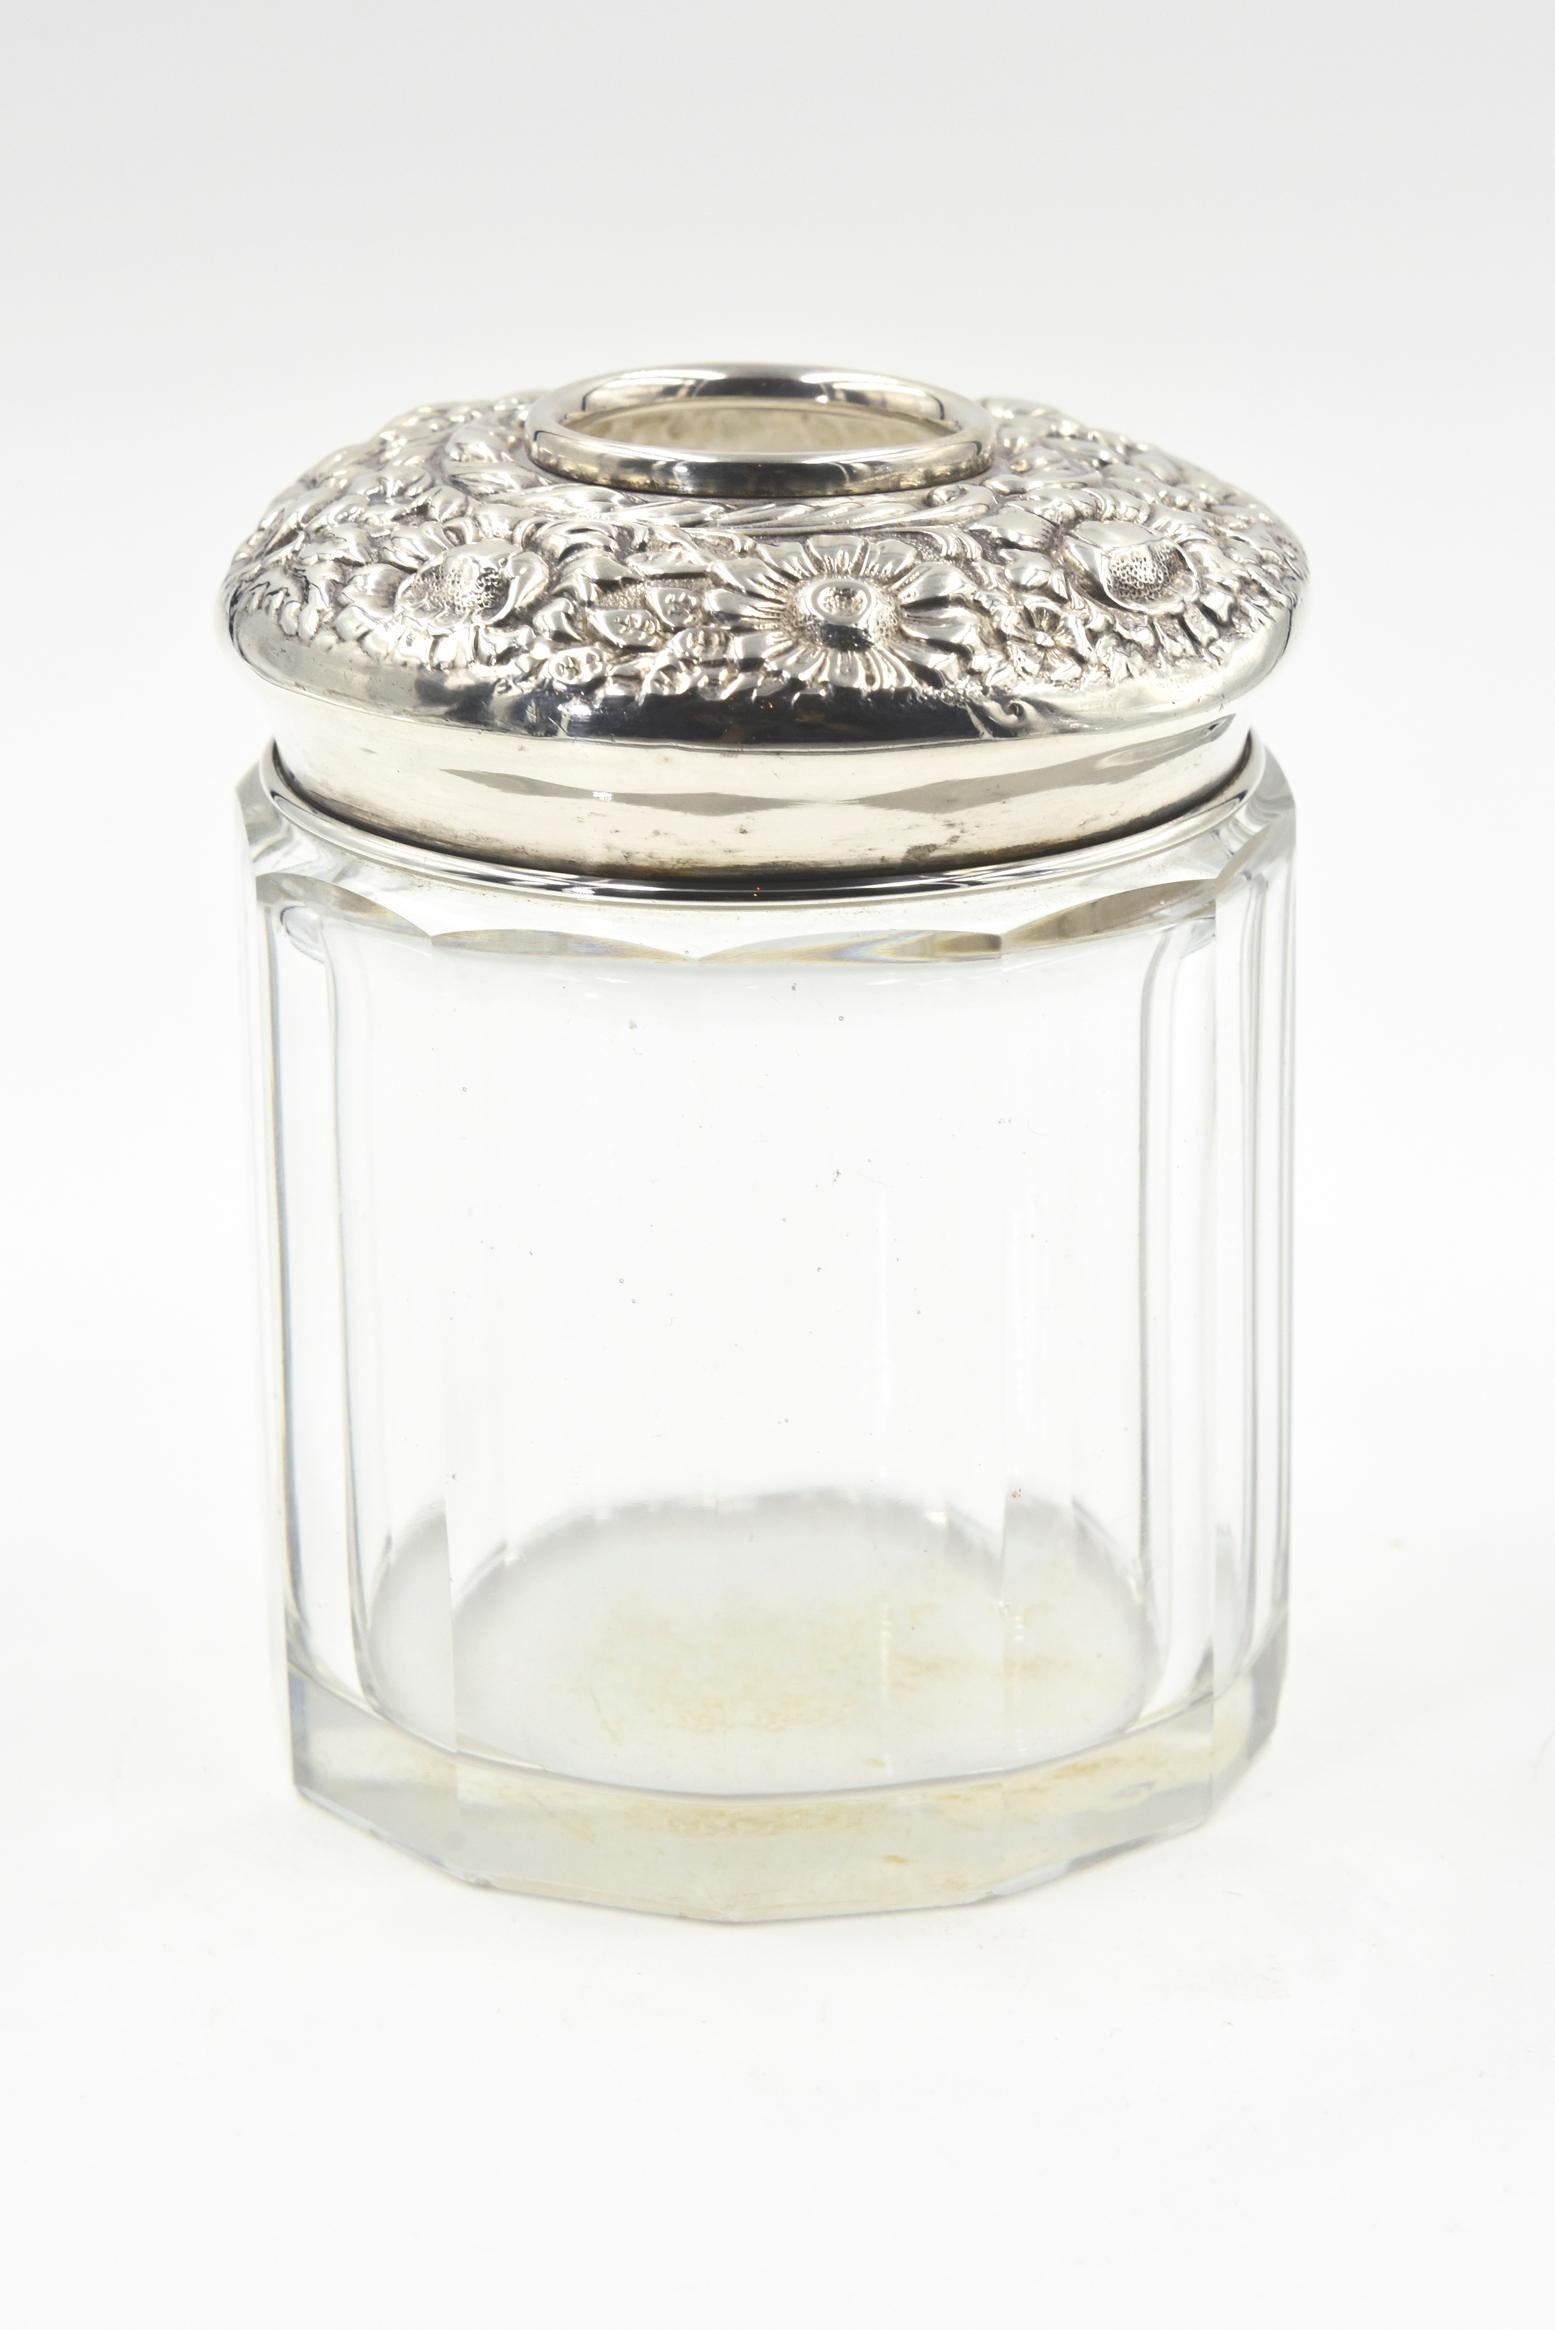 Early 20th century R. Blackinton & Co. hair receiver jar featuring a high relief sterling silver repose floral design lid that has a hole to insert hair on a 12 panel glass jar. This jar would be look beautiful on a dressing table or in a bathroom.